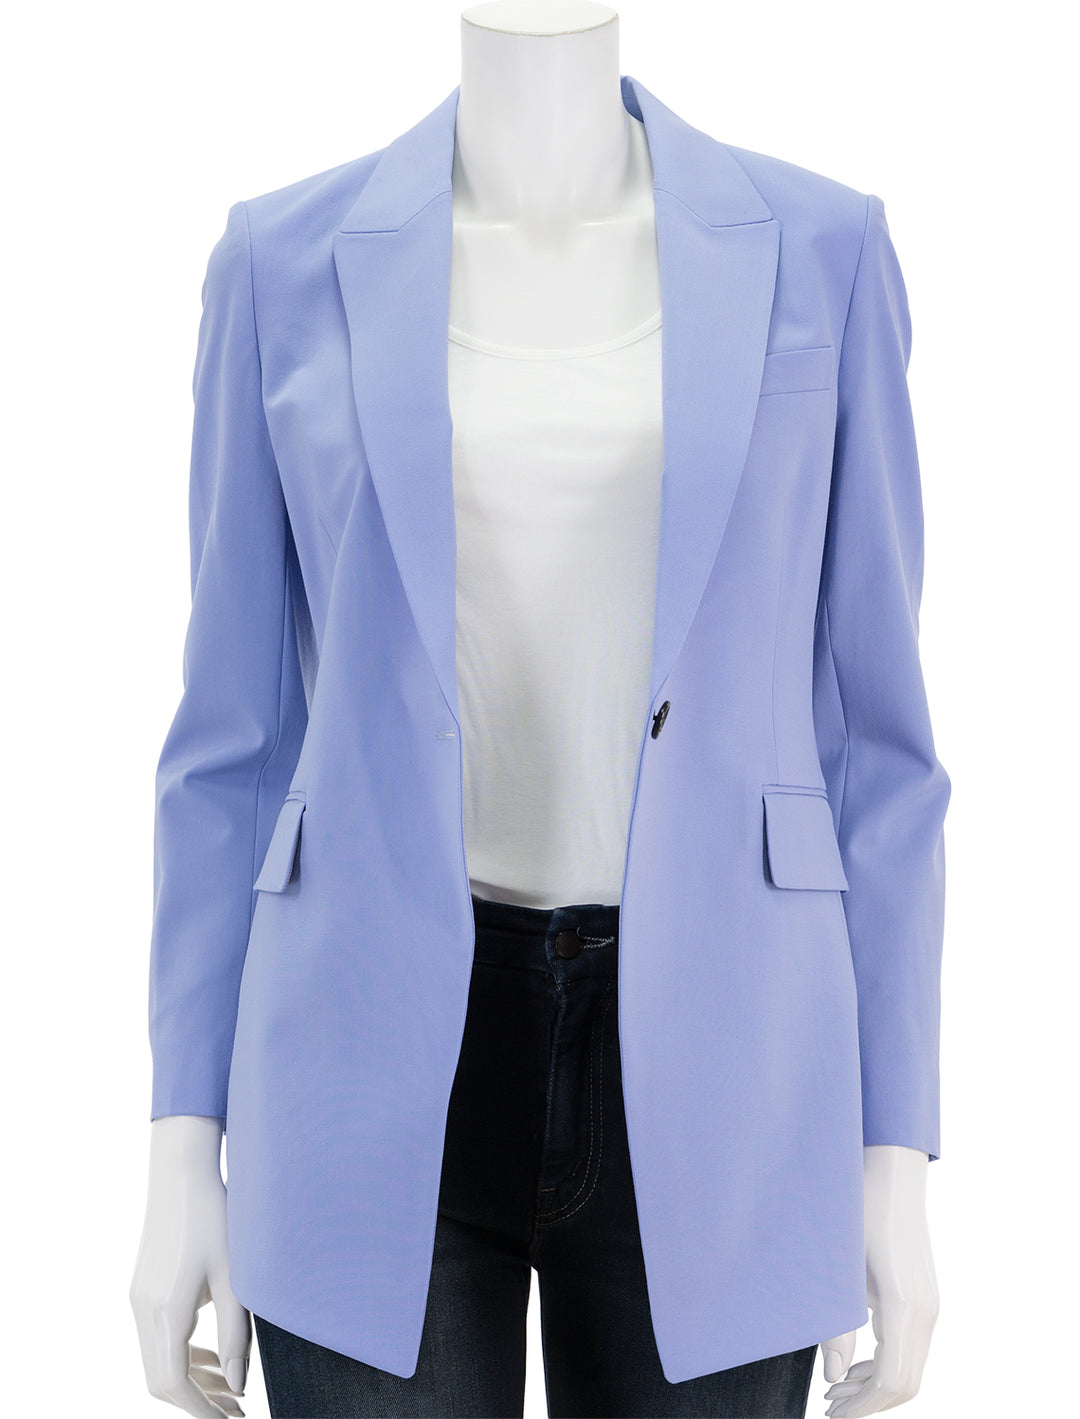 Front view of Theory's etiennette blazer in grotto, unbuttoned.